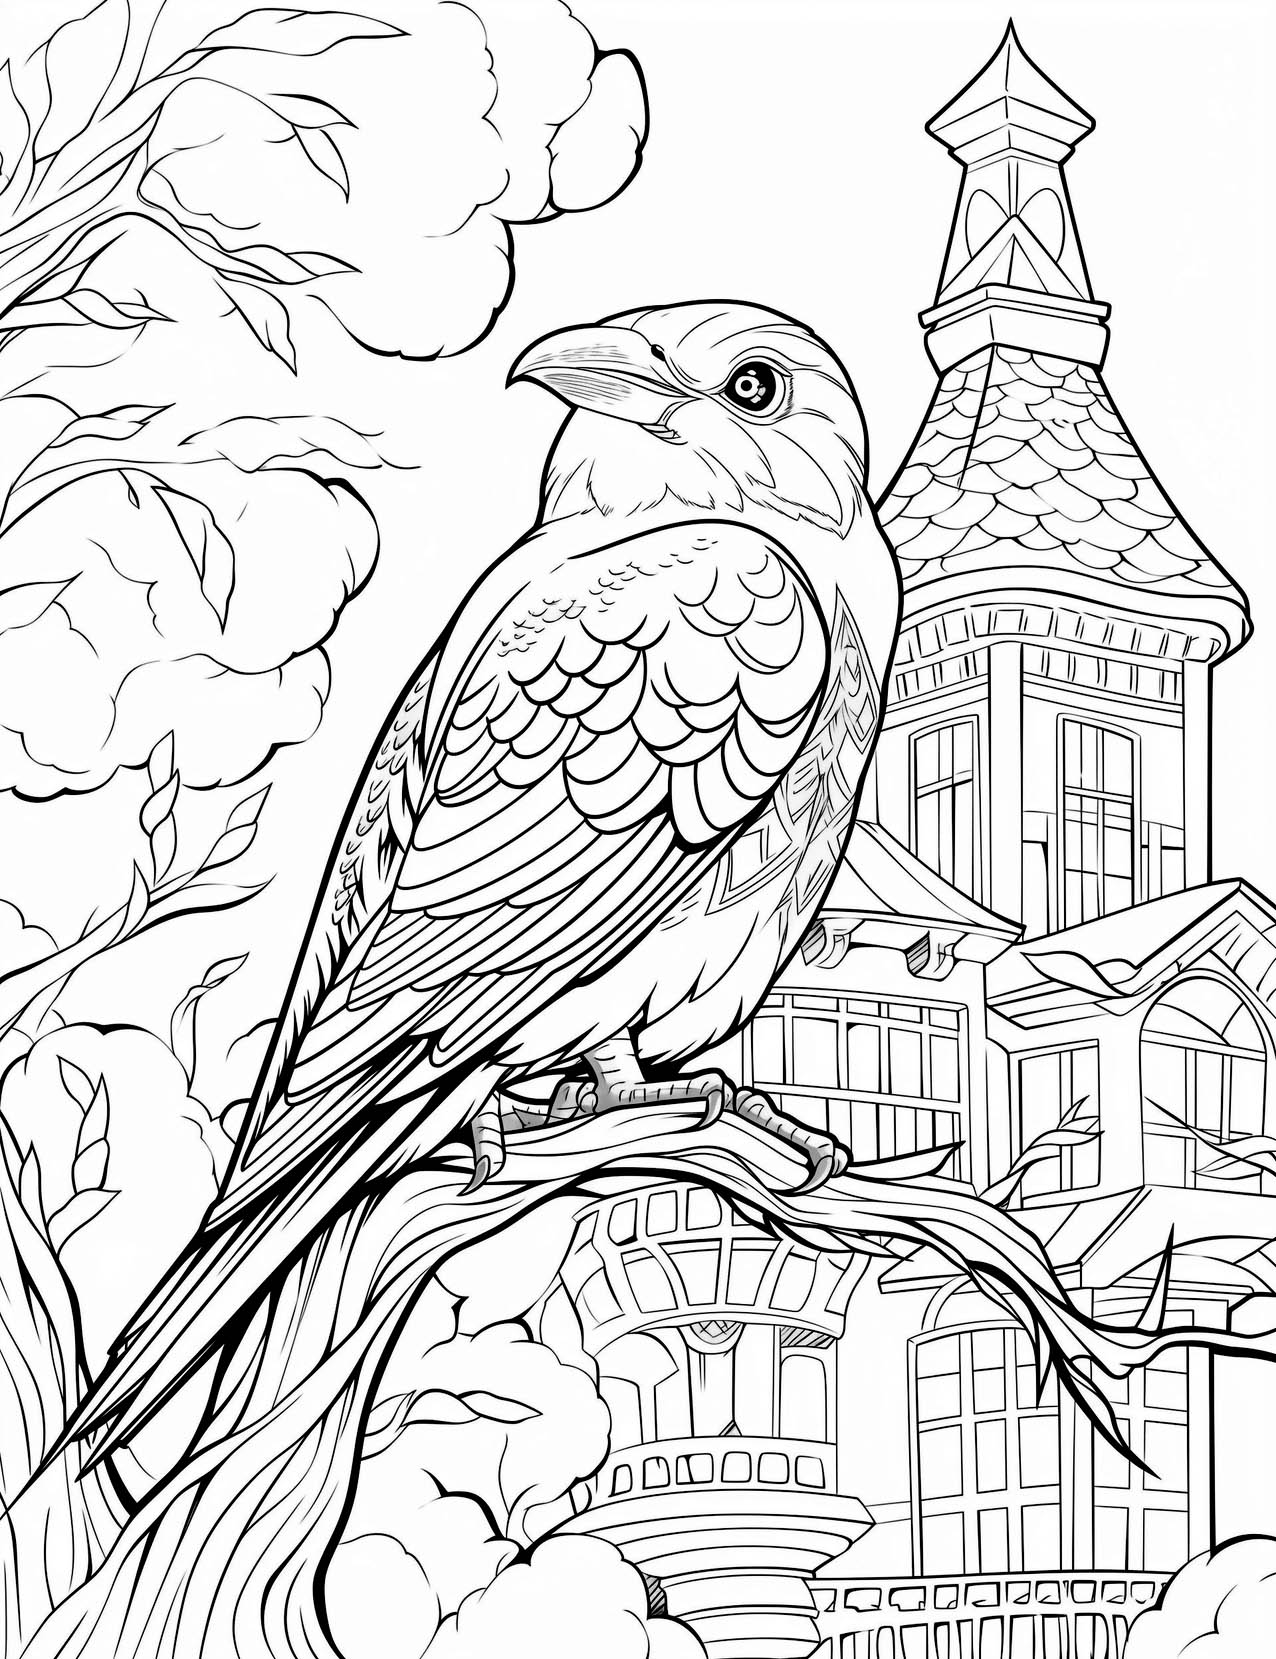 Bird coloring pages for kids and adults